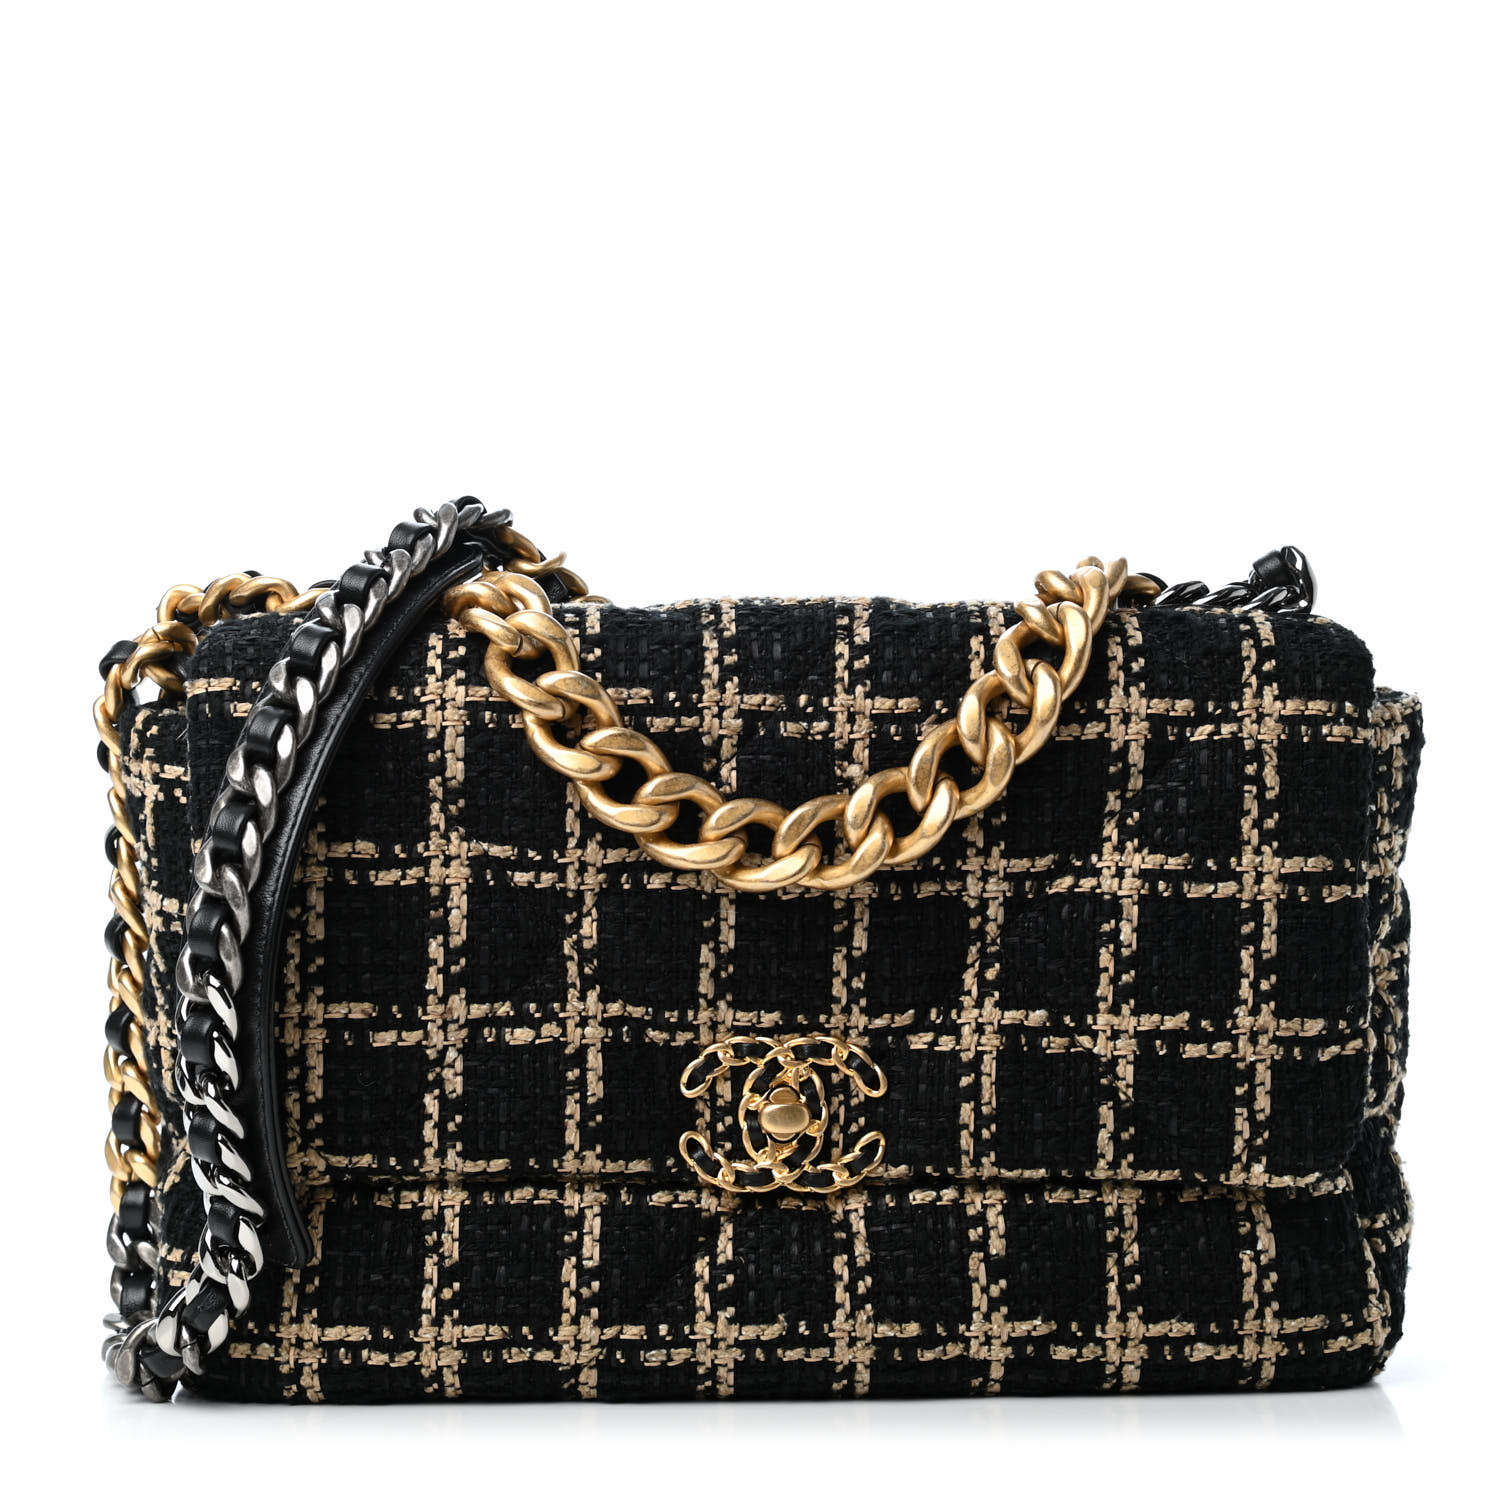 CHANEL Tweed Quilted Large Chanel 19 Flap Black Beige 814470 | FASHIONPHILE